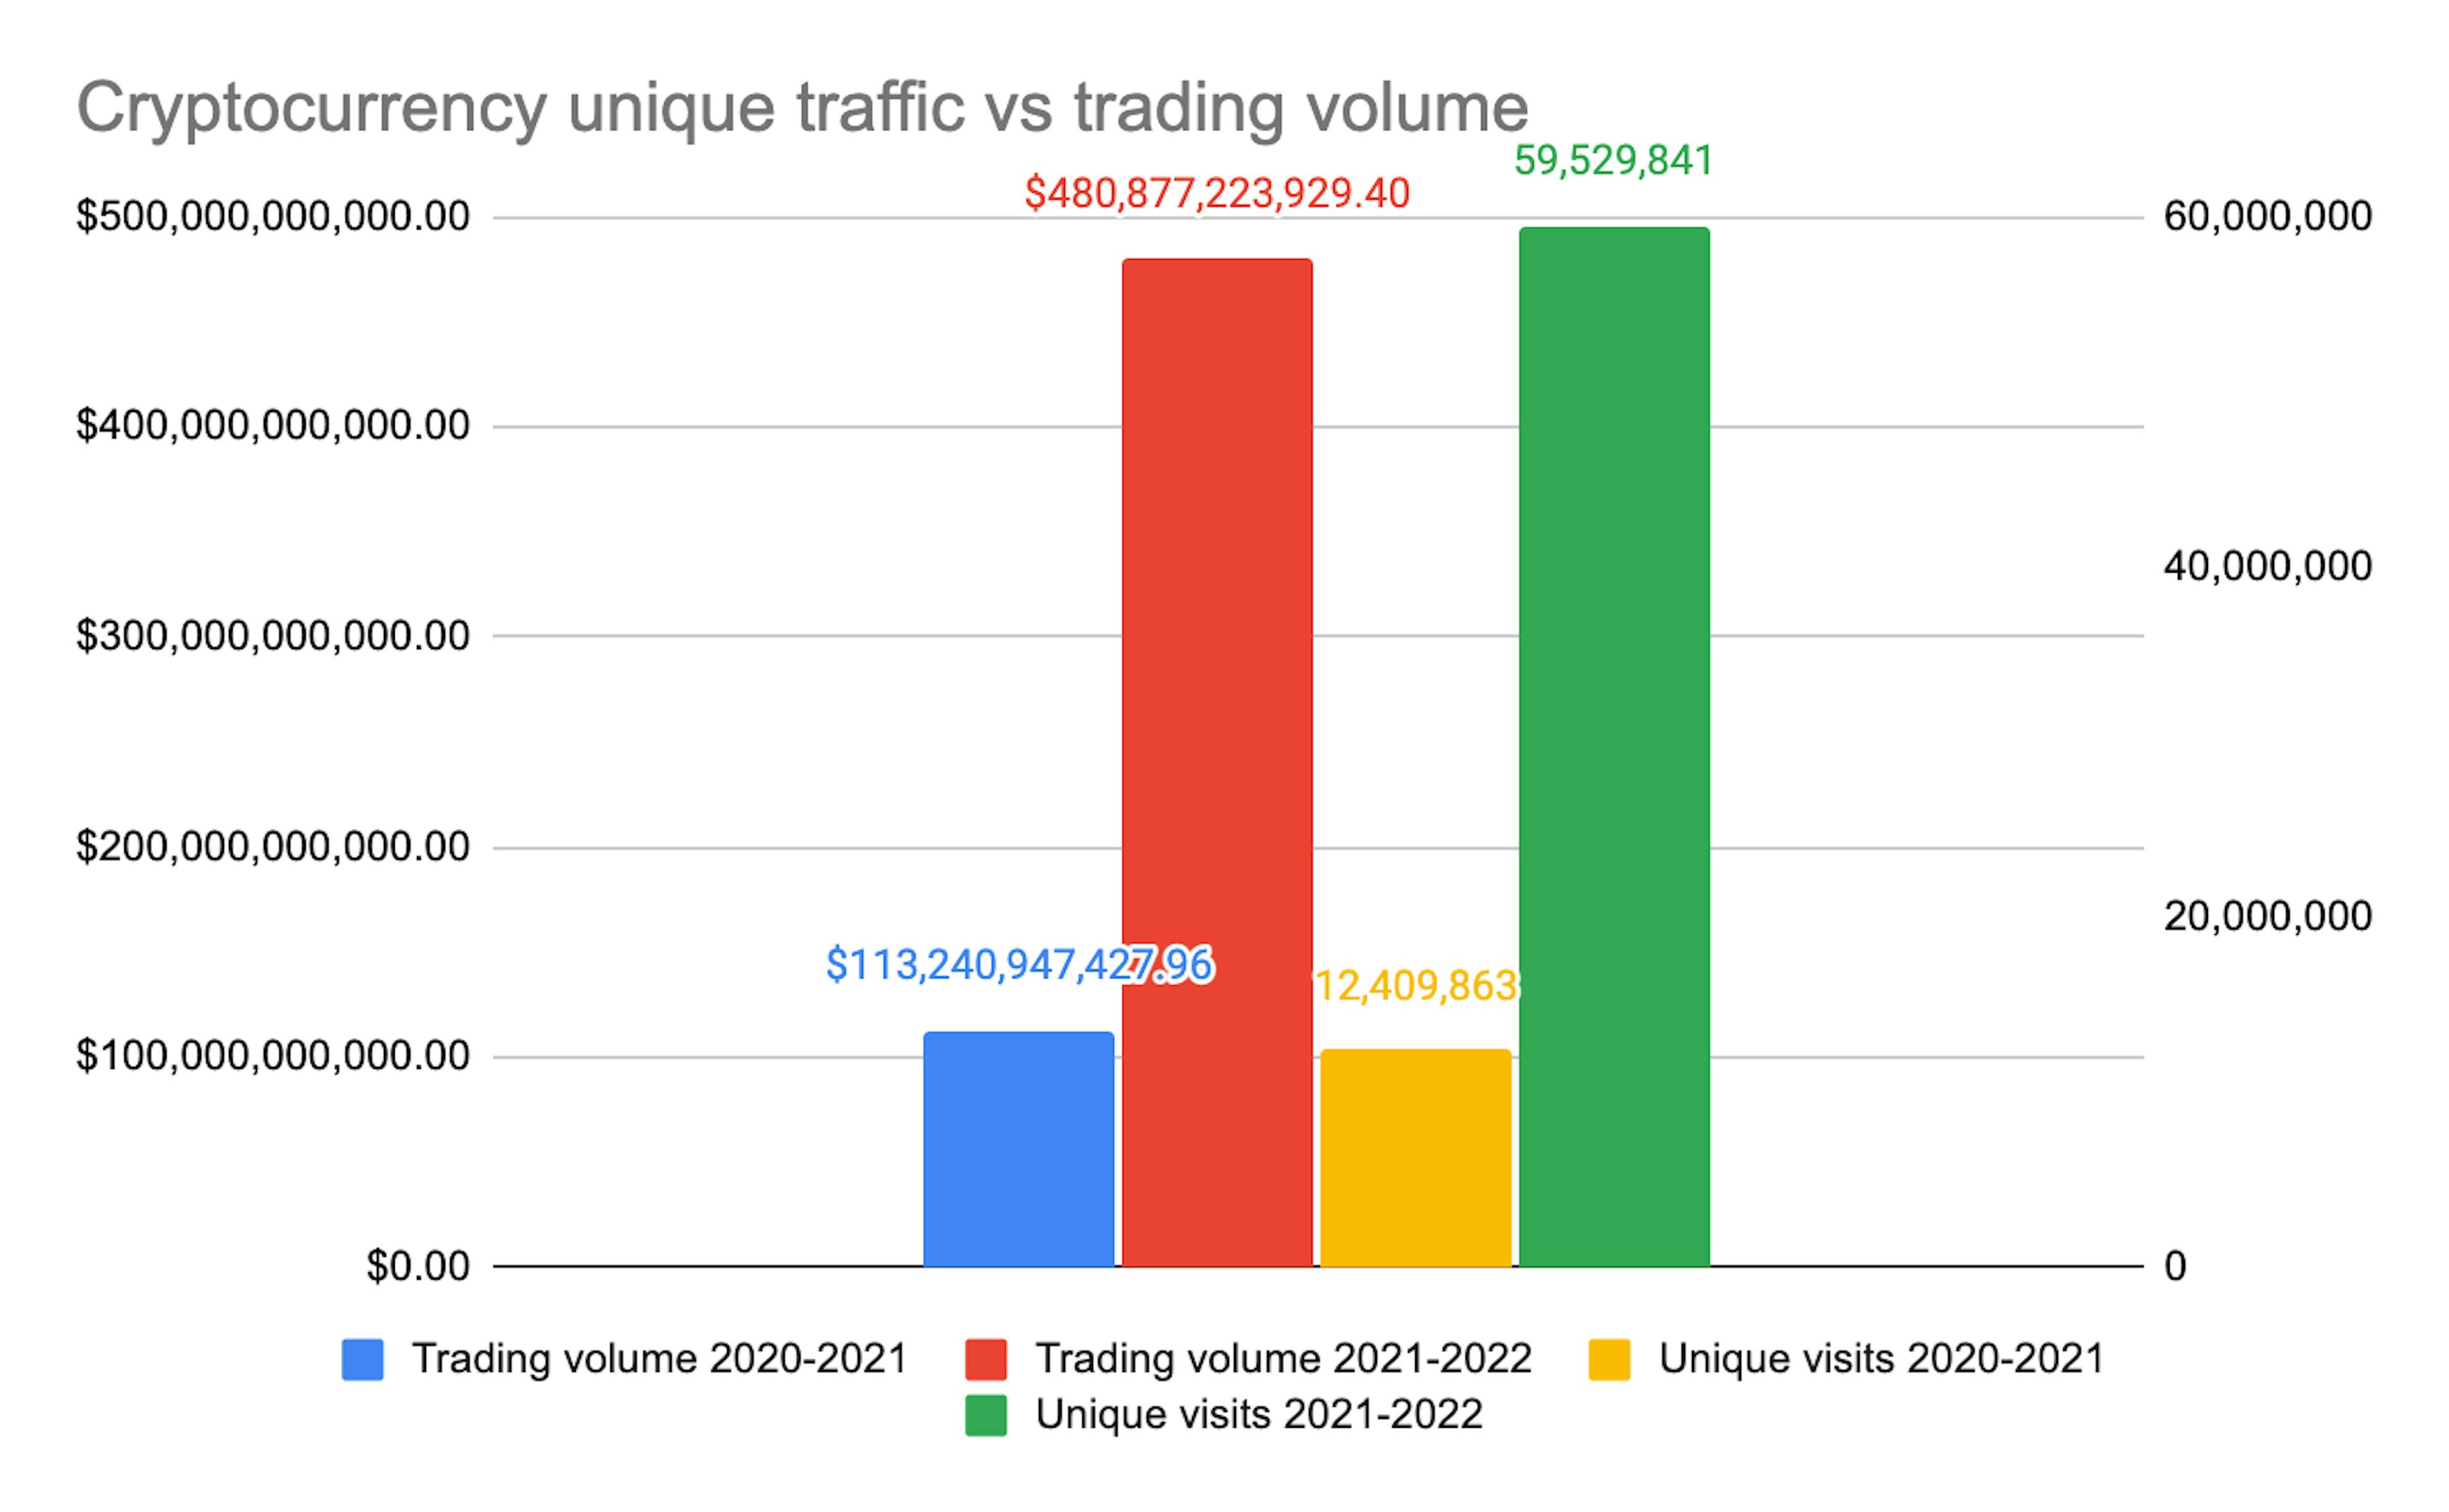 Trading volume and unique visitors to cryptocurrency exchanges